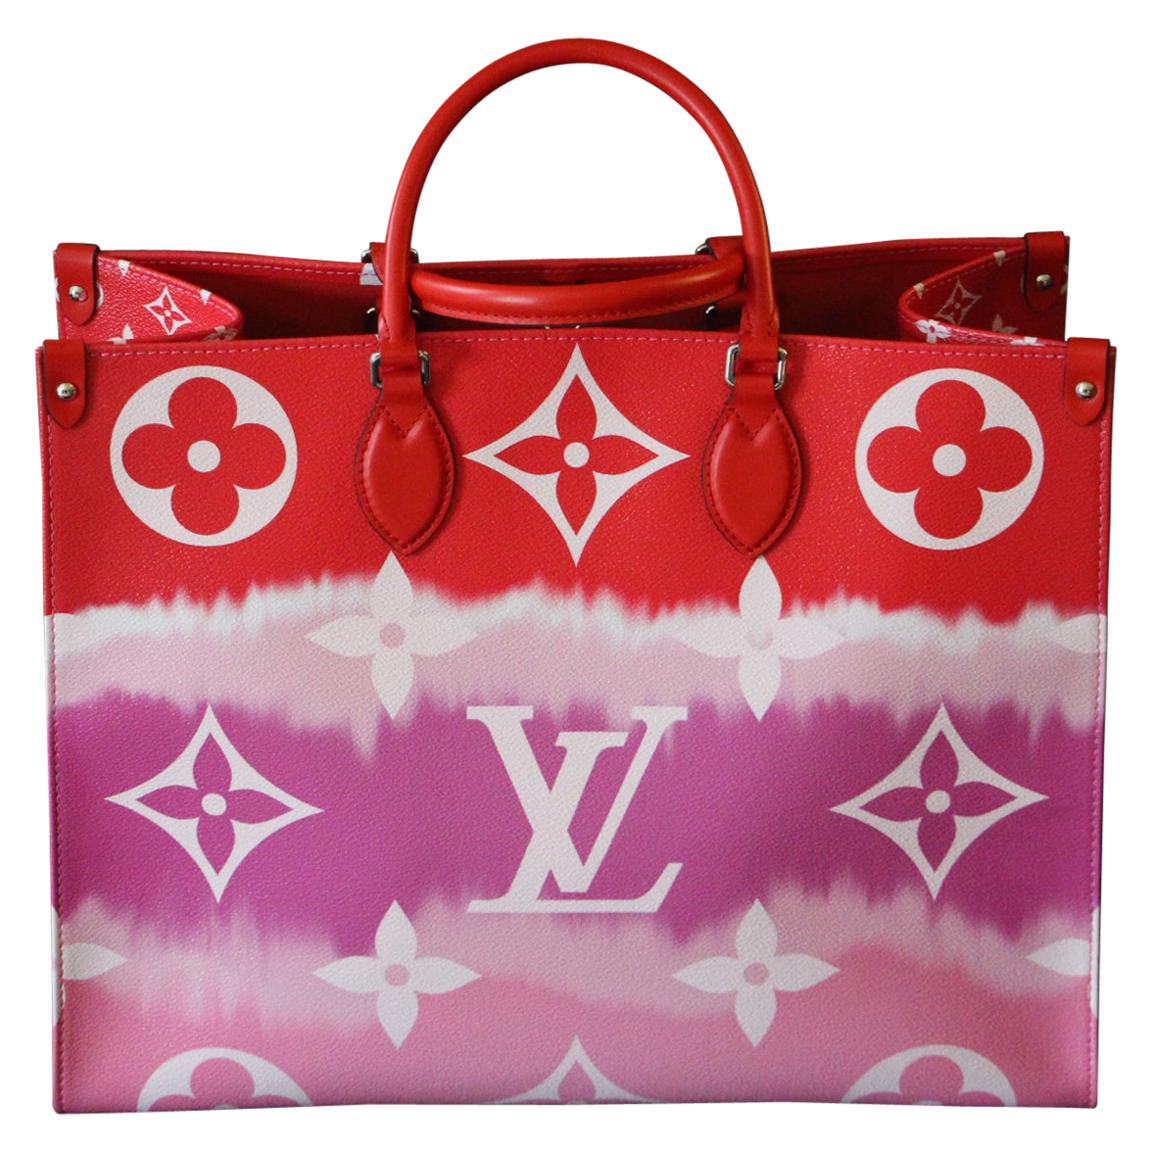 Louis Vuitton Bag Escale on the Go, Brand New 2020 Limited Edition